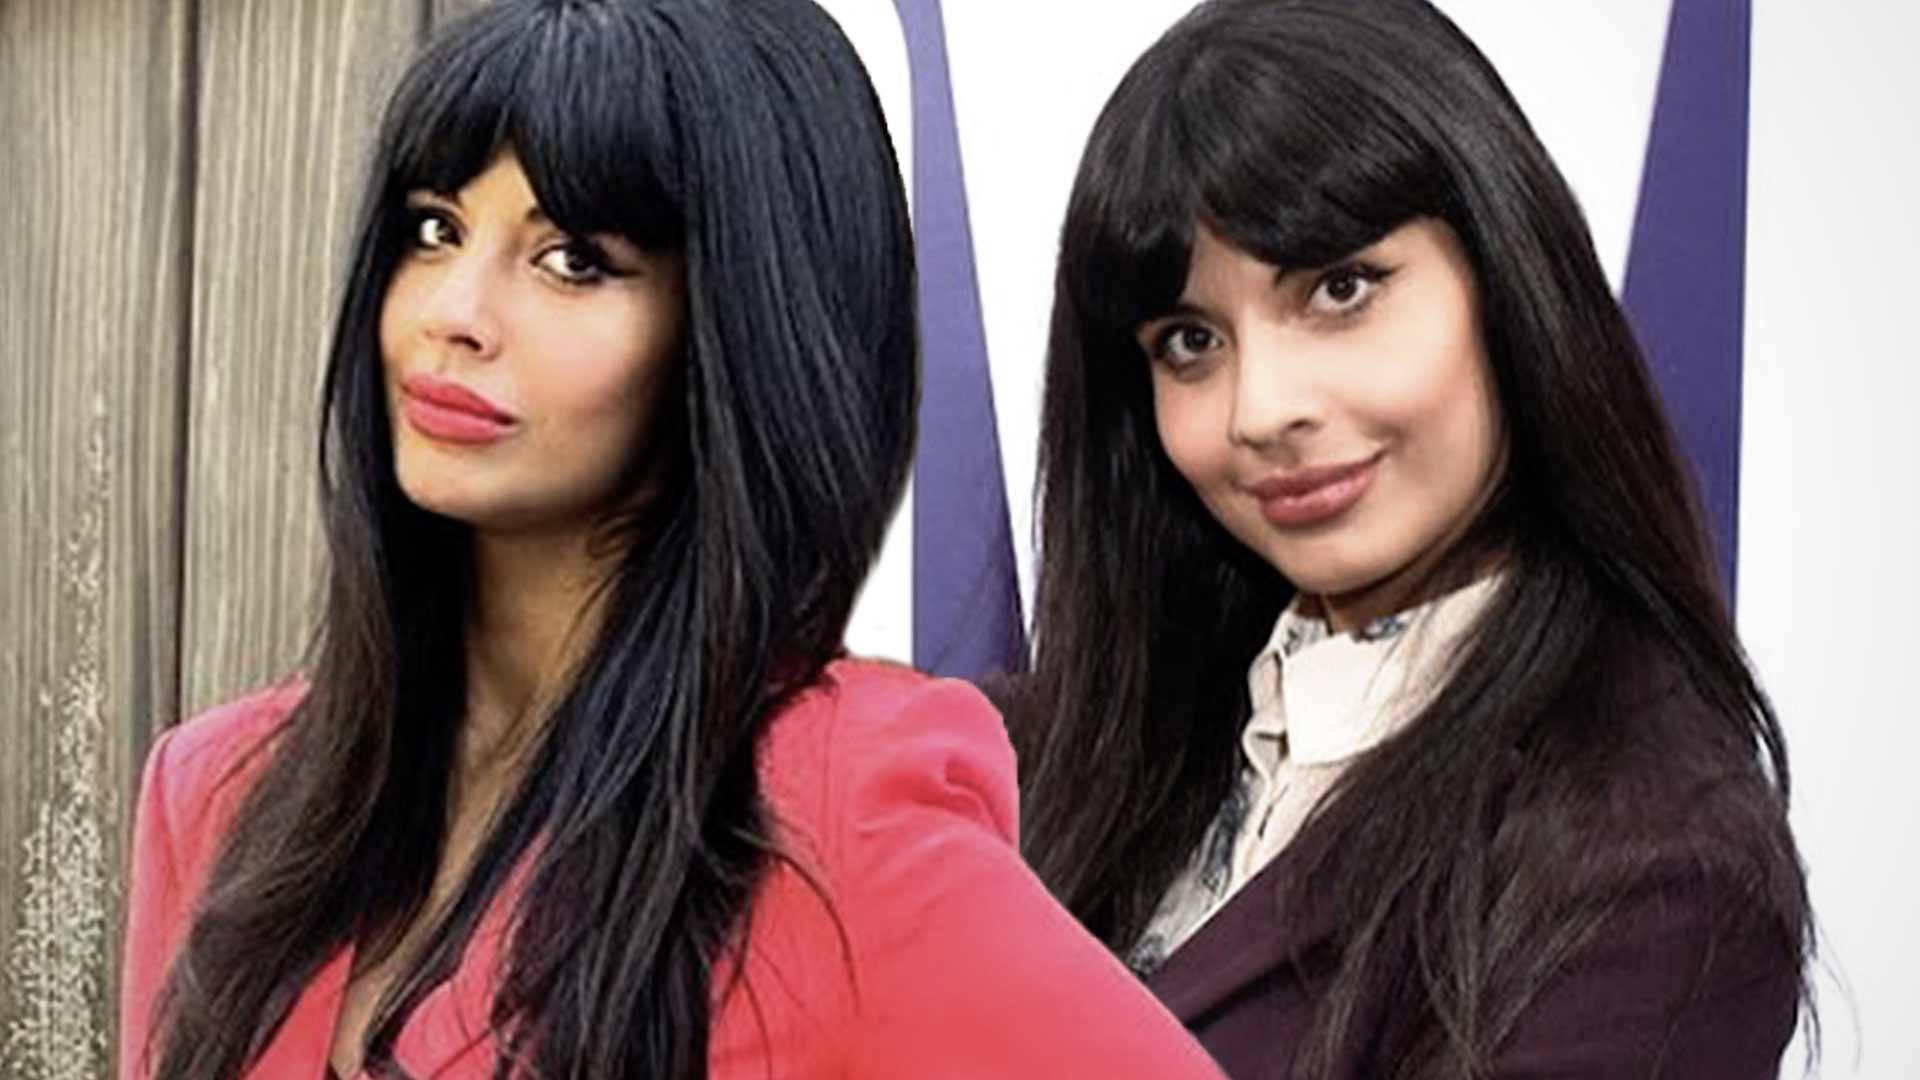 ‘Good Place’ Star Jameela Jamil Praised For Unedited Pantless Cellulite Snap